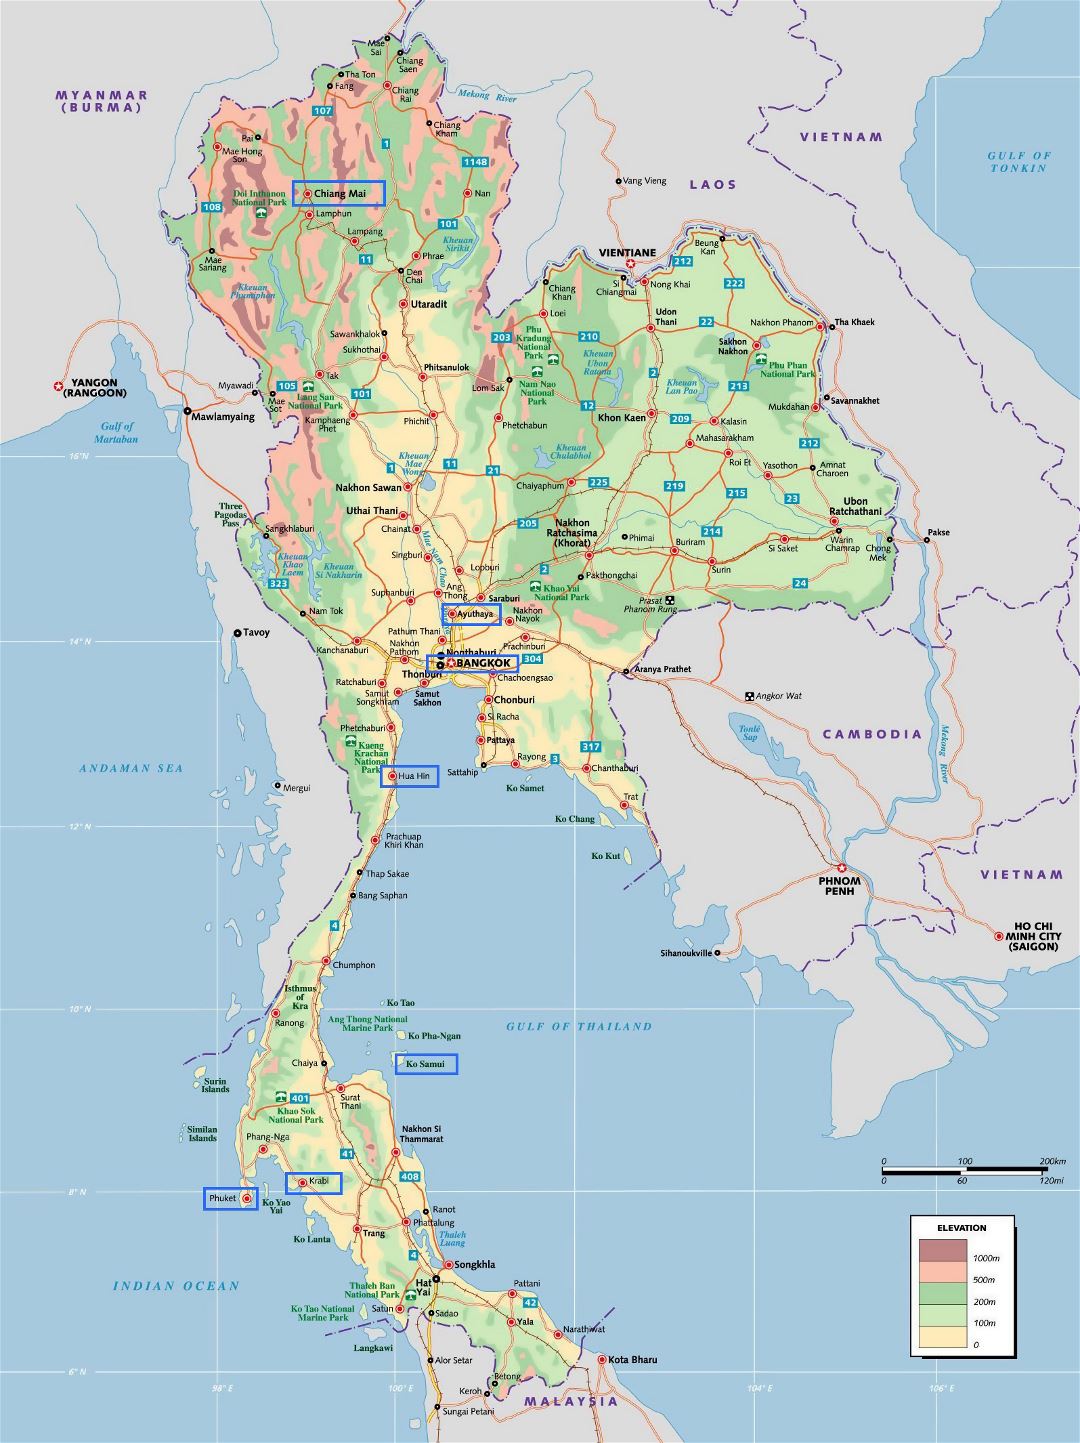 Large elevation map of Thailand with other marks